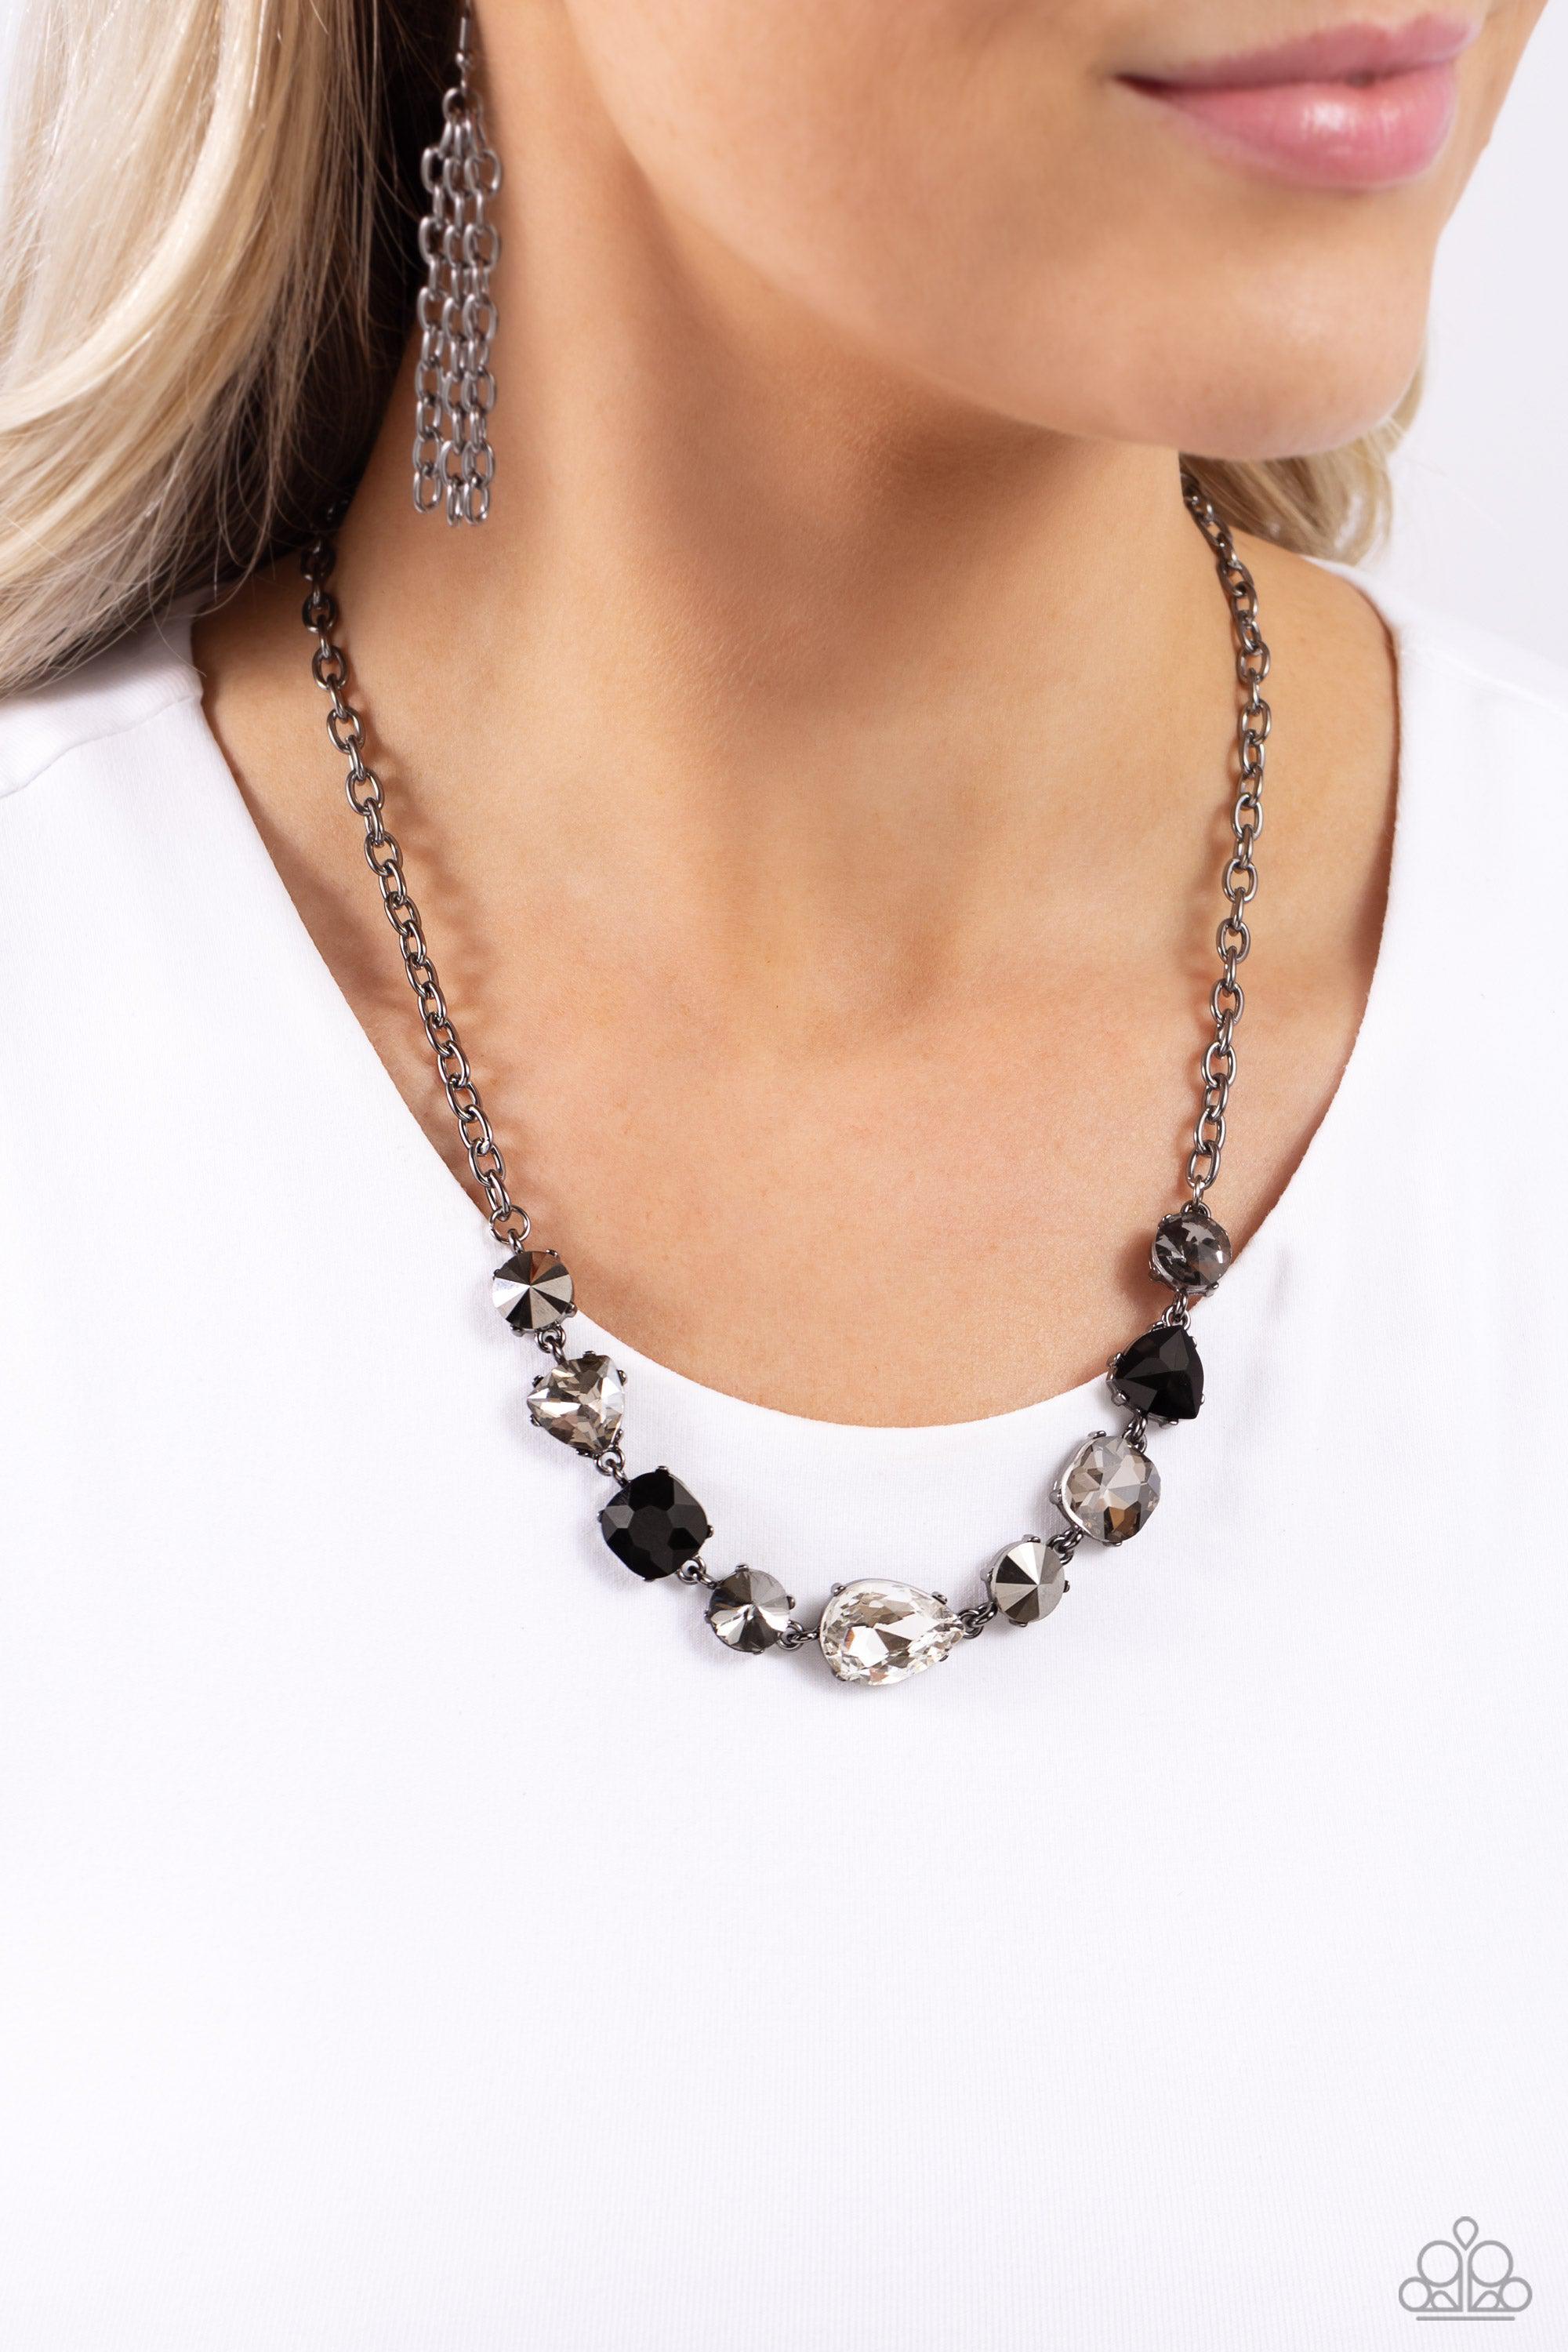 Emphatic Edge Black & White Gem Necklace - Paparazzi Accessories- lightbox - CarasShop.com - $5 Jewelry by Cara Jewels